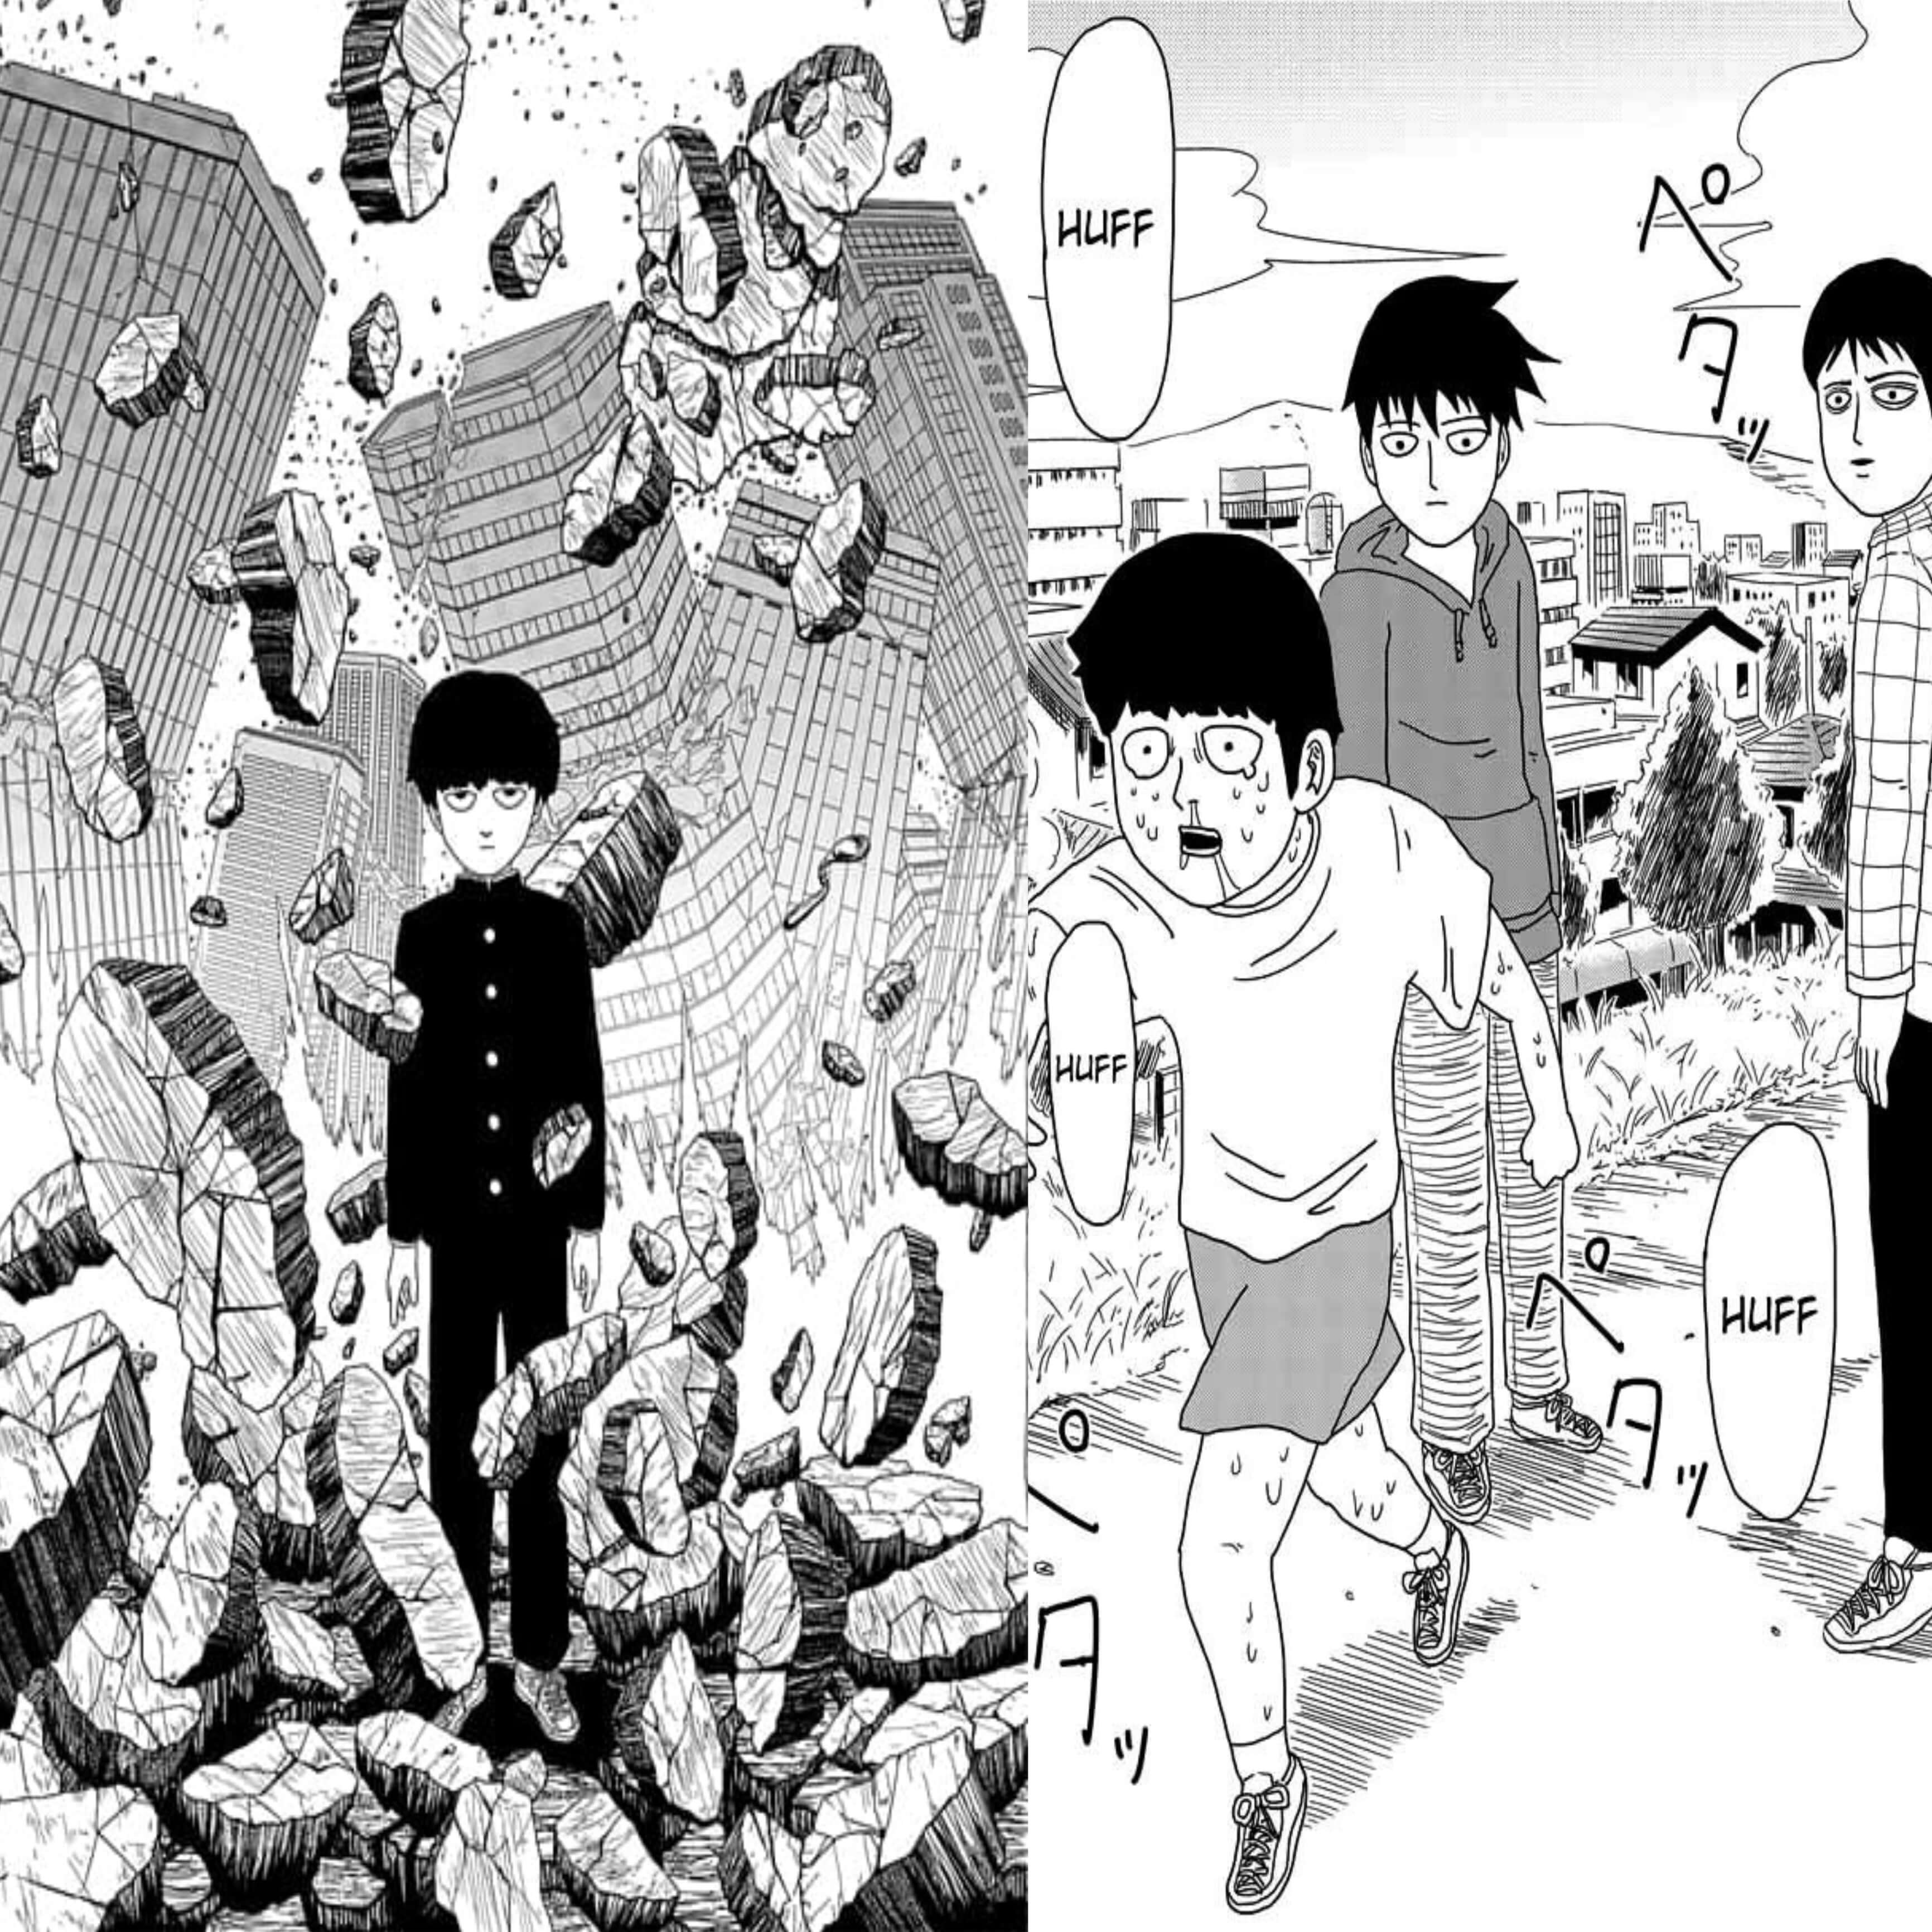 Mob Psycho 100: Season 3: Release Date, Story & Everything You Should Know